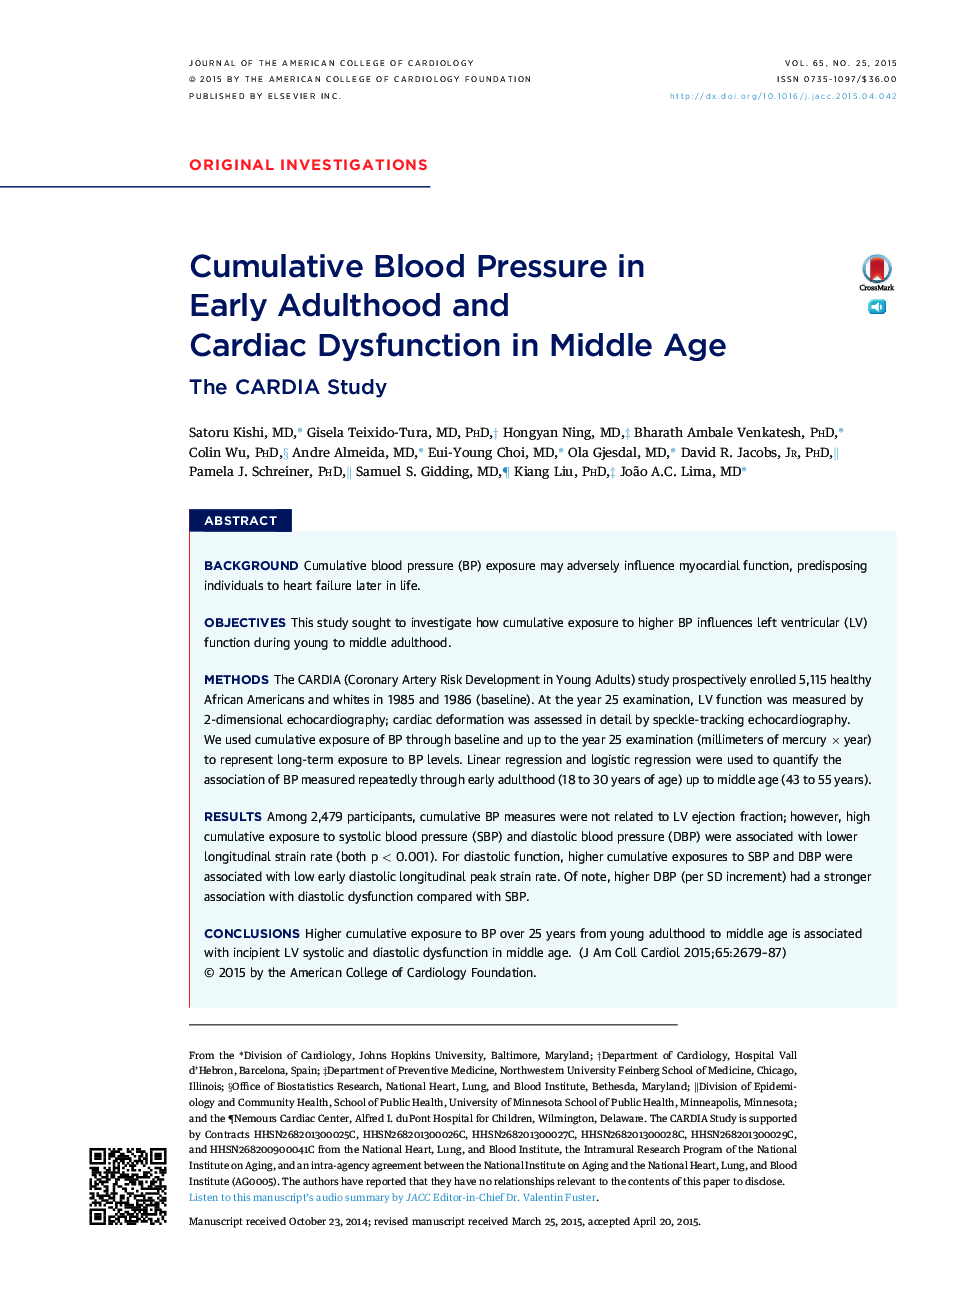 Cumulative Blood Pressure in Early Adulthood and Cardiac Dysfunction in Middle Age : The CARDIA Study